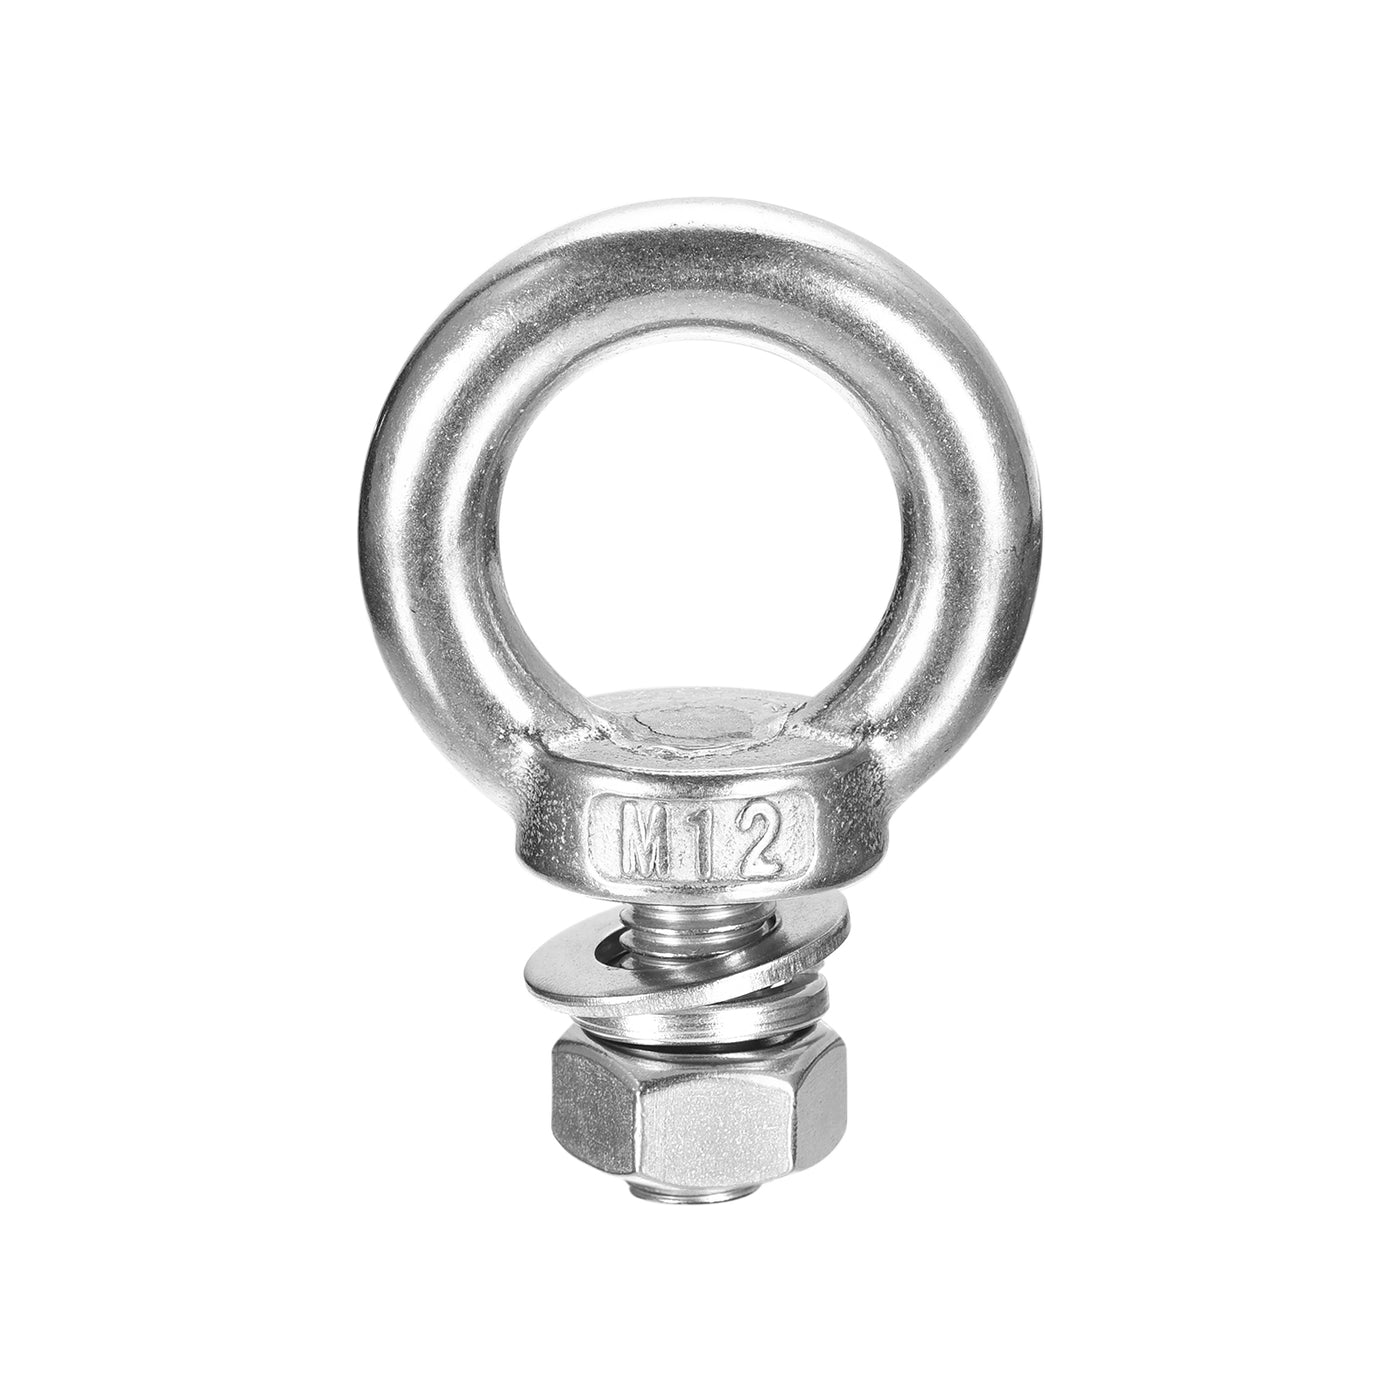 uxcell Uxcell Lifting Eye Bolt, 1 Set M12x20mm Eye Bolt with Nut Washer 304 Stainless Steel